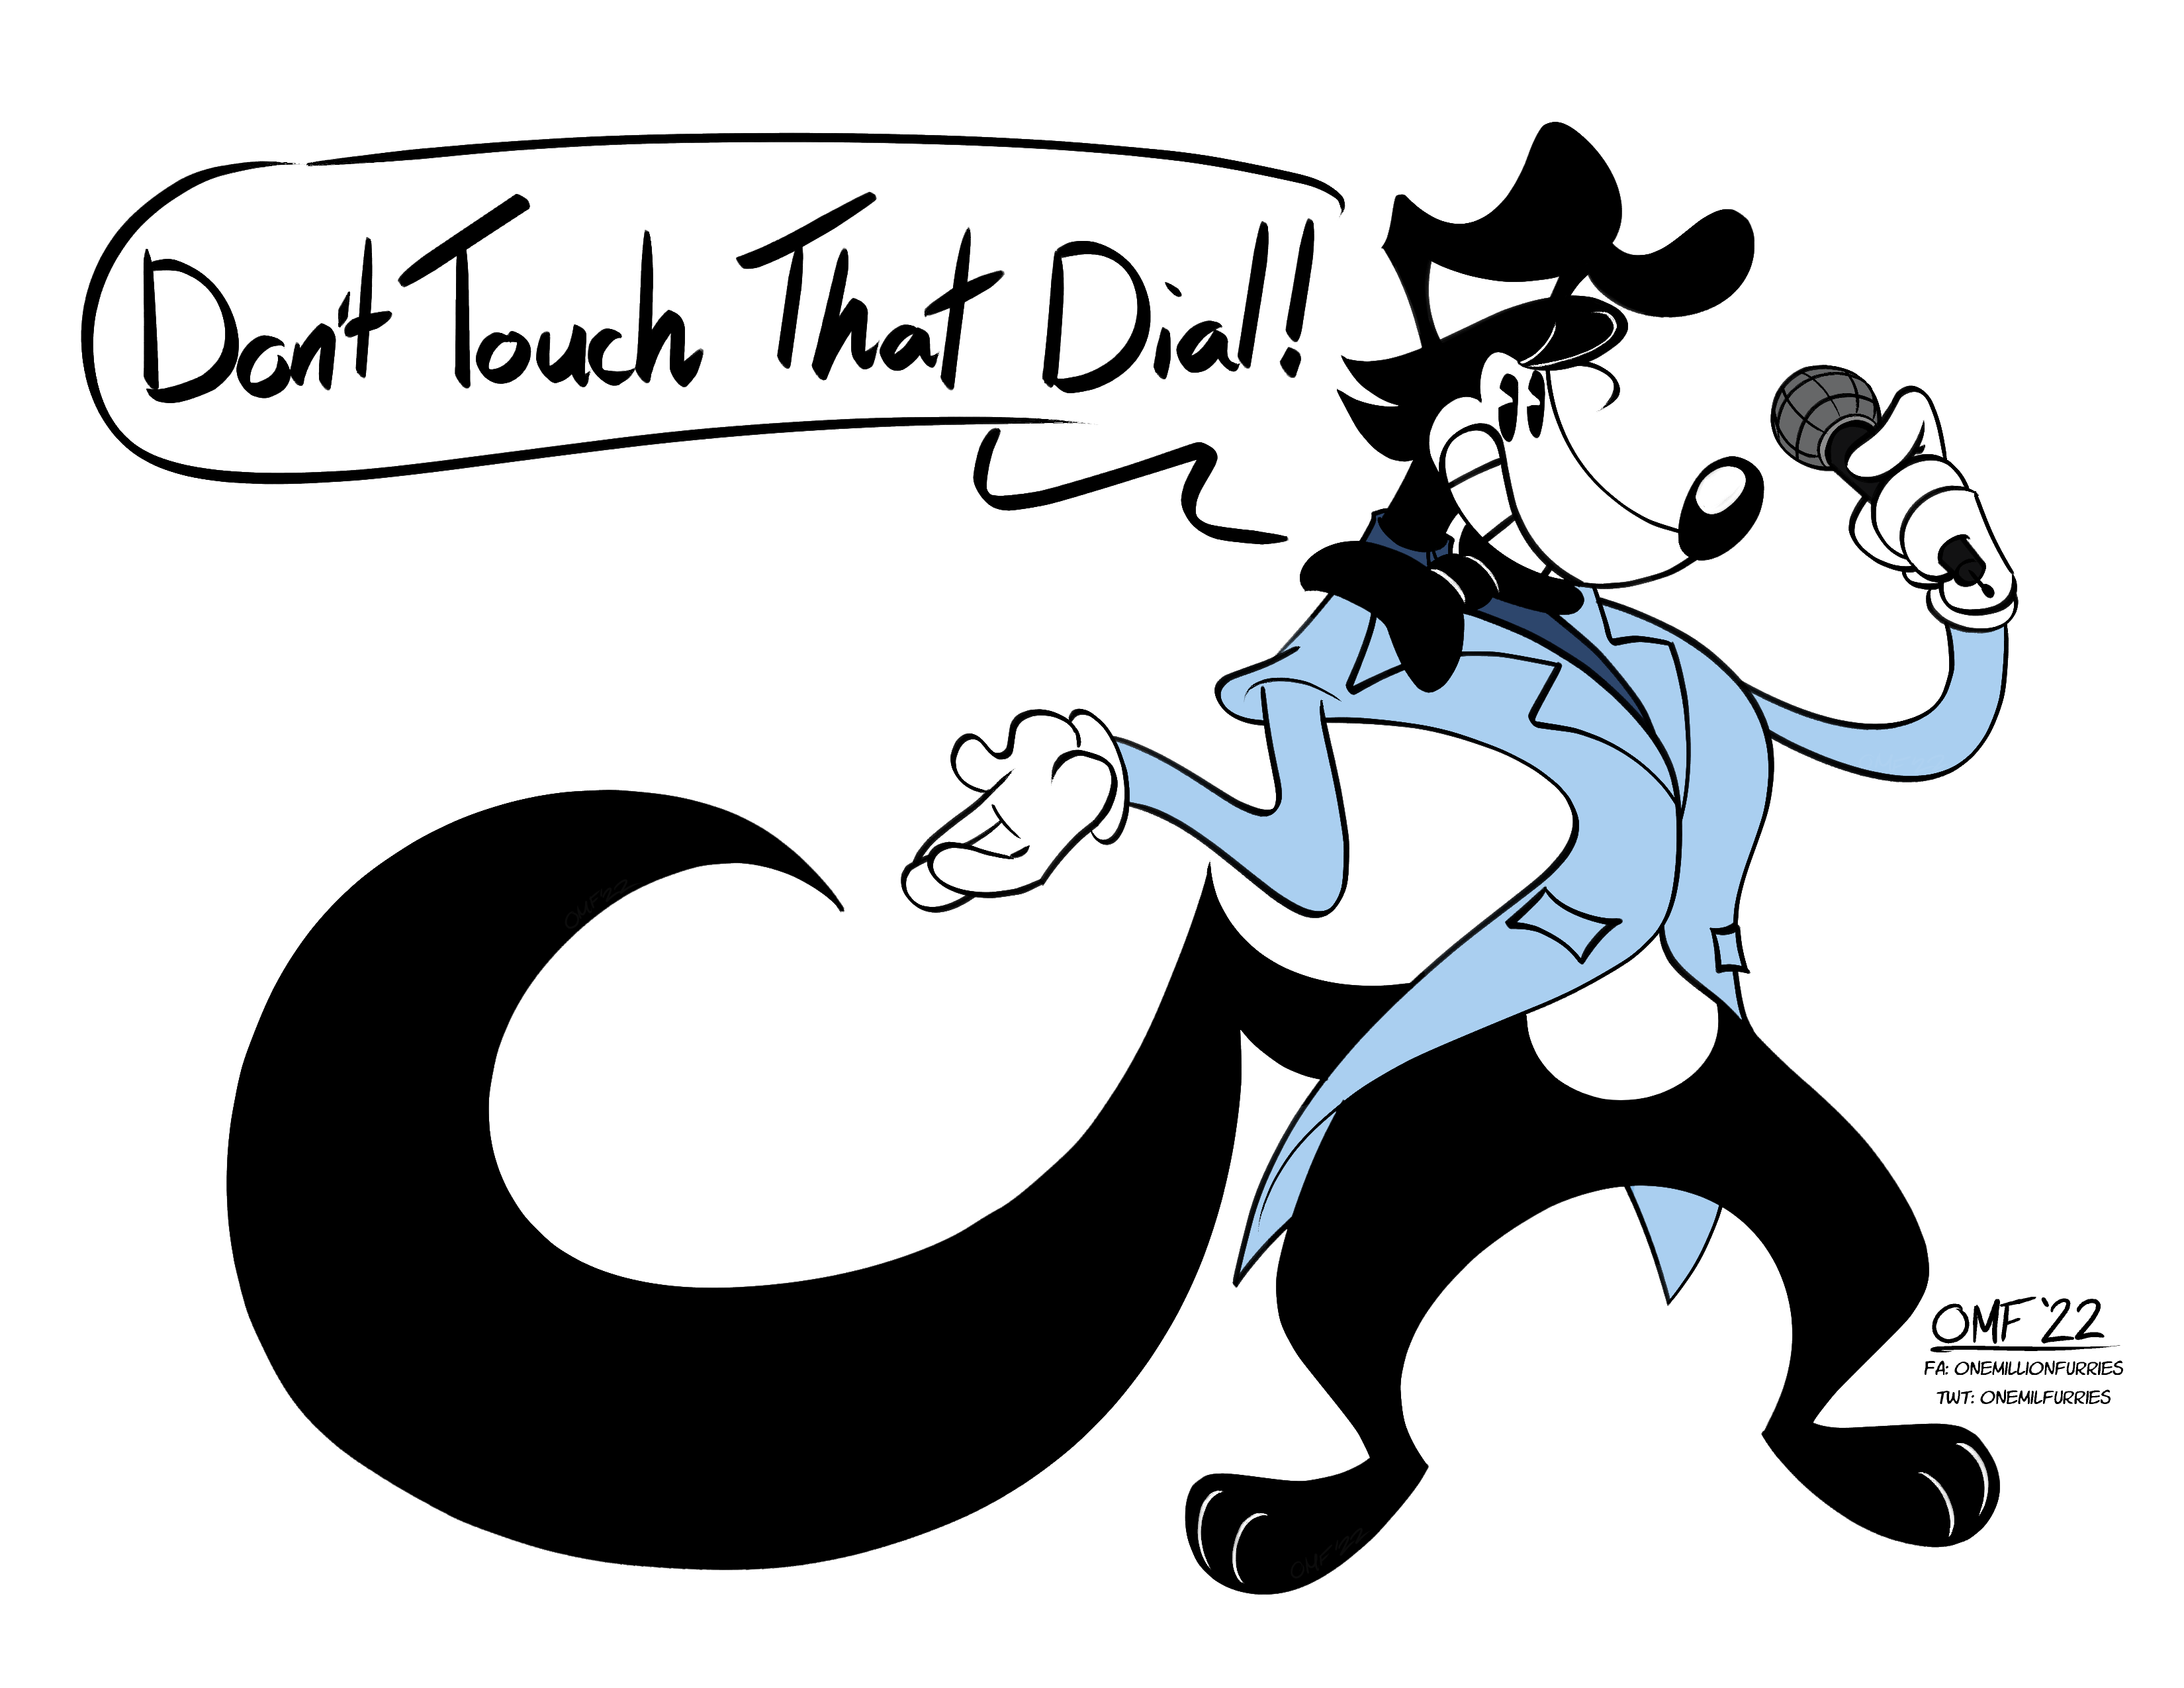 A fullbody drawing of a rubber hose style anthro dog with big elbowed ears and a large tail. It is drawn in black and white, and is wearing a light blue coat with a black bow tie. It holds a microphone and has a speech bubble that reads 'Don't Touch That Dial!'